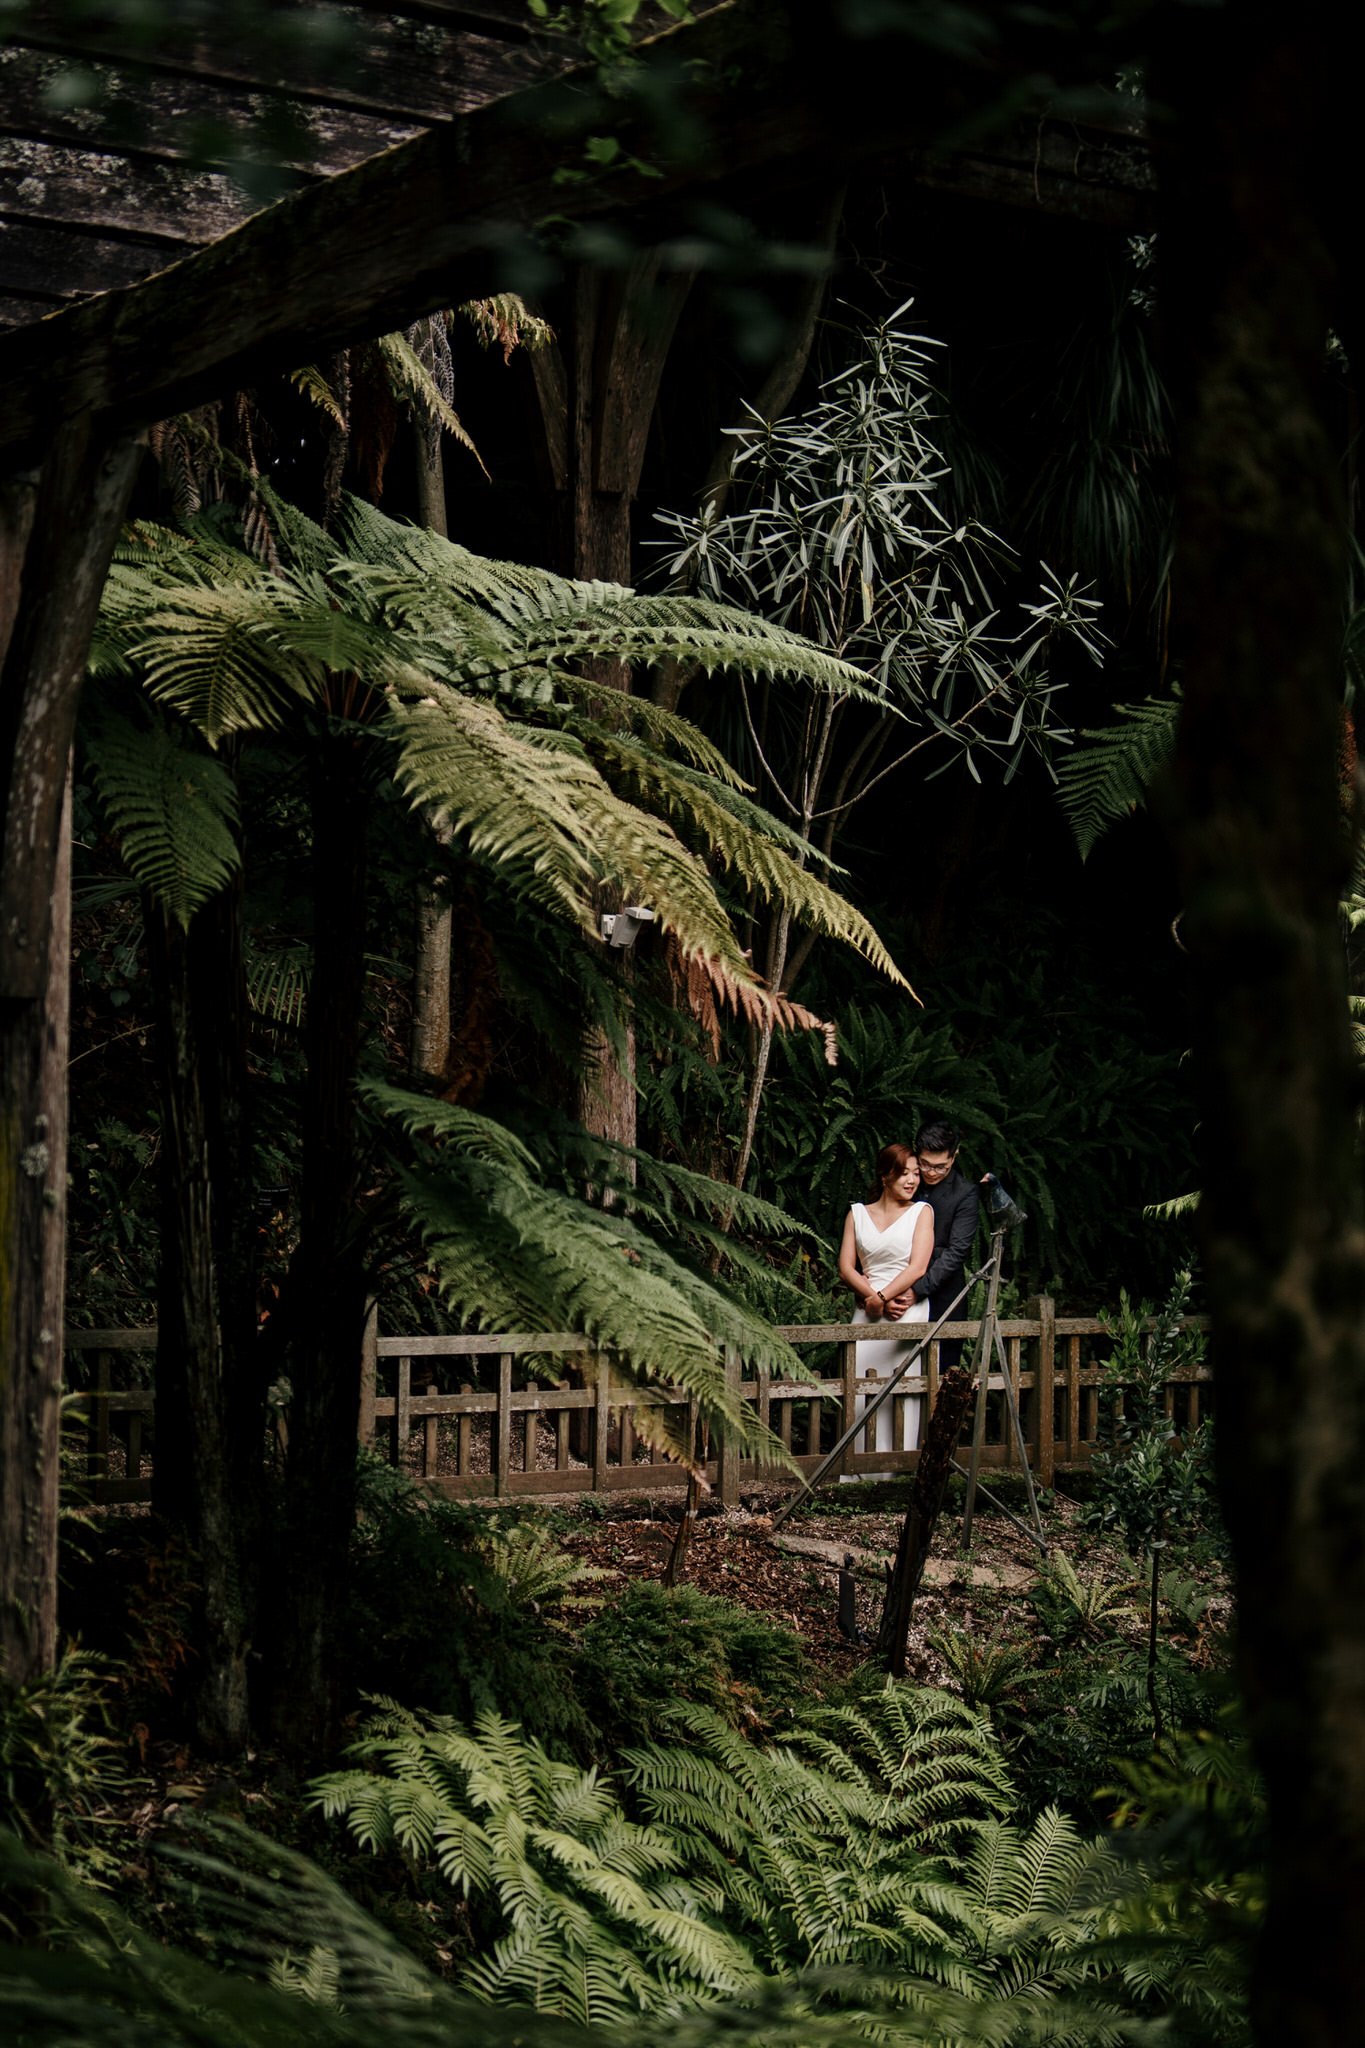 auckland-wedding-photographer-videographer-story-by-koo-koo's-jewelry-dear-white-productions-pre-wedding-engagement-photo-glass-house-botanic-fernery-garden (33).JPG